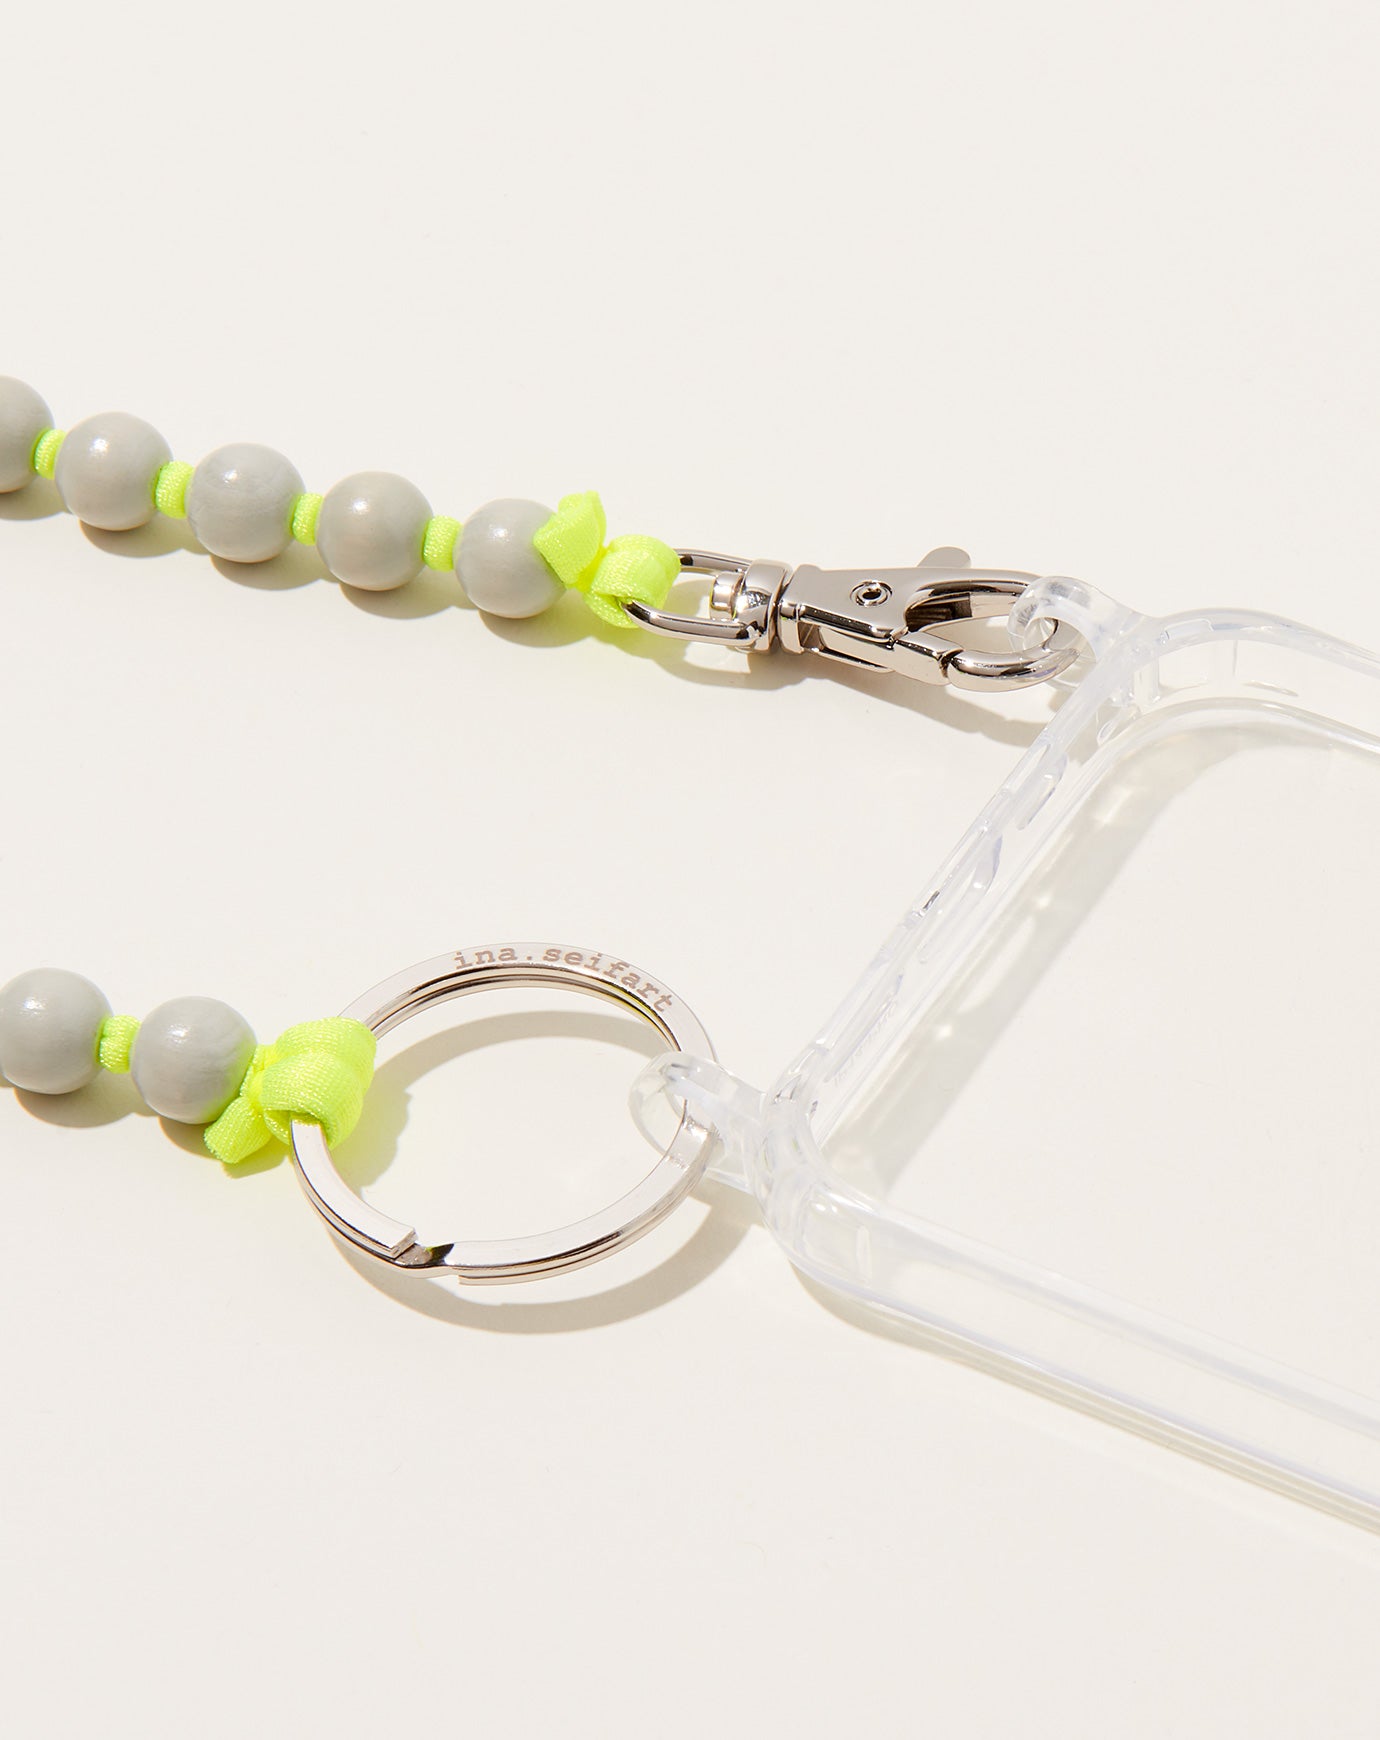 Ina Seifart Handykette iPhone Necklace in Light Grey on Neon Yellow